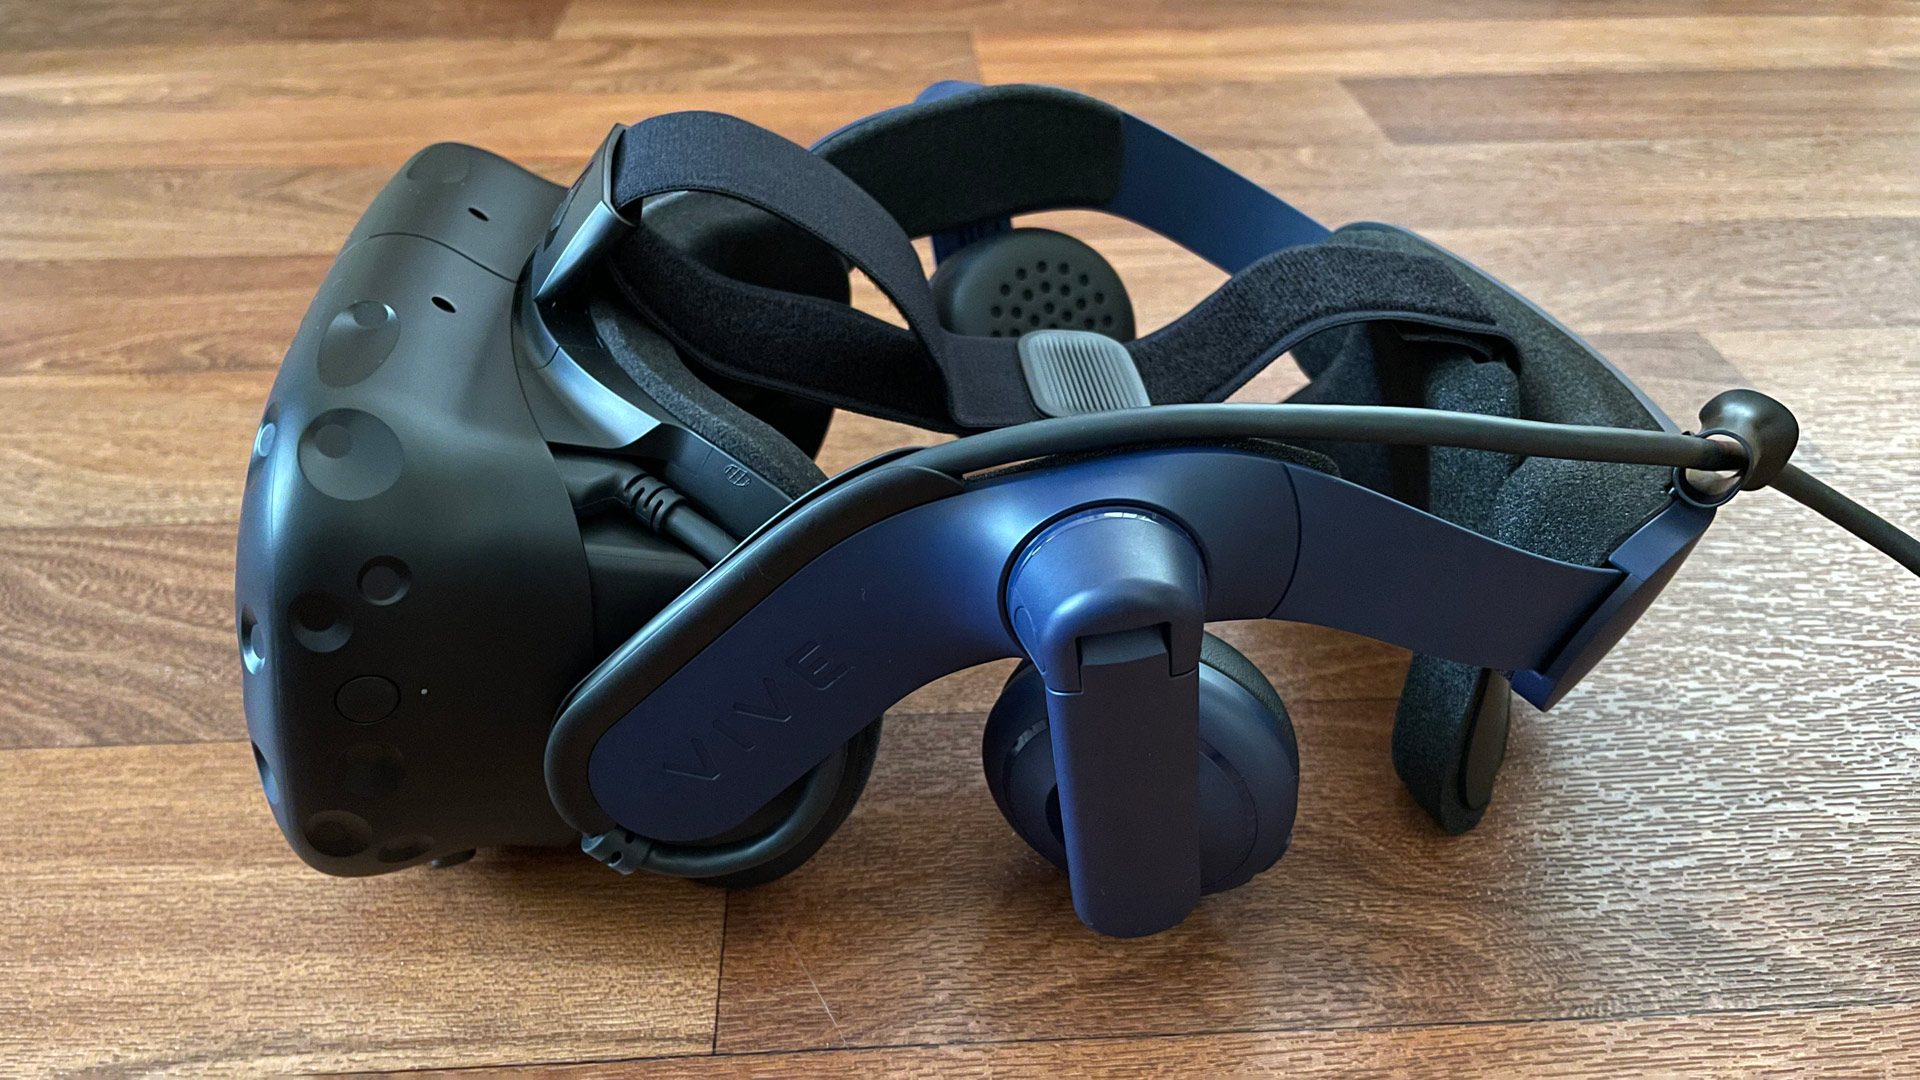 single Ready Arena HTC Vive Pro 2 Review – "Pro" Price with Not Quite Pro Performance